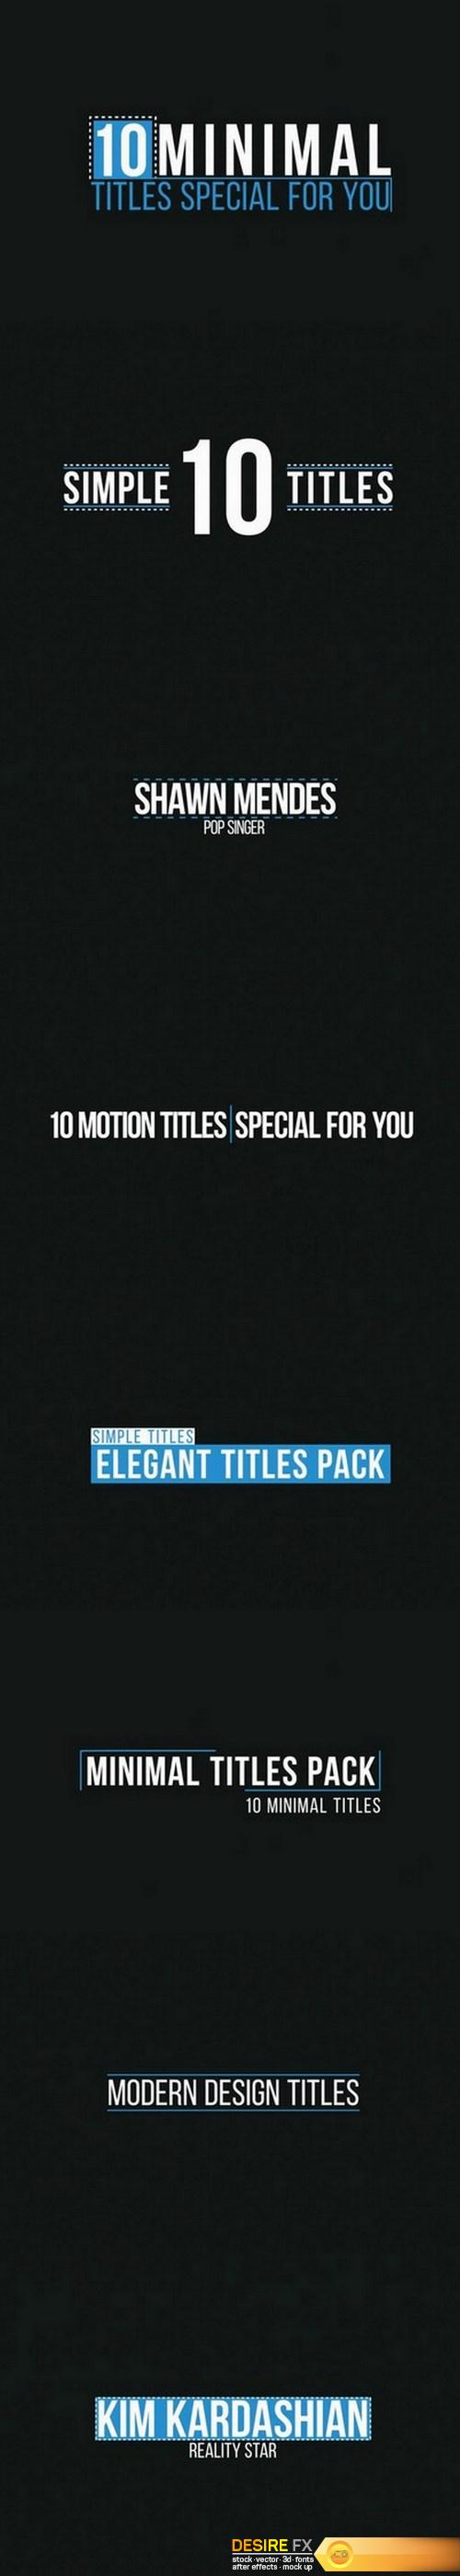 Simple Titles After Effects Templates